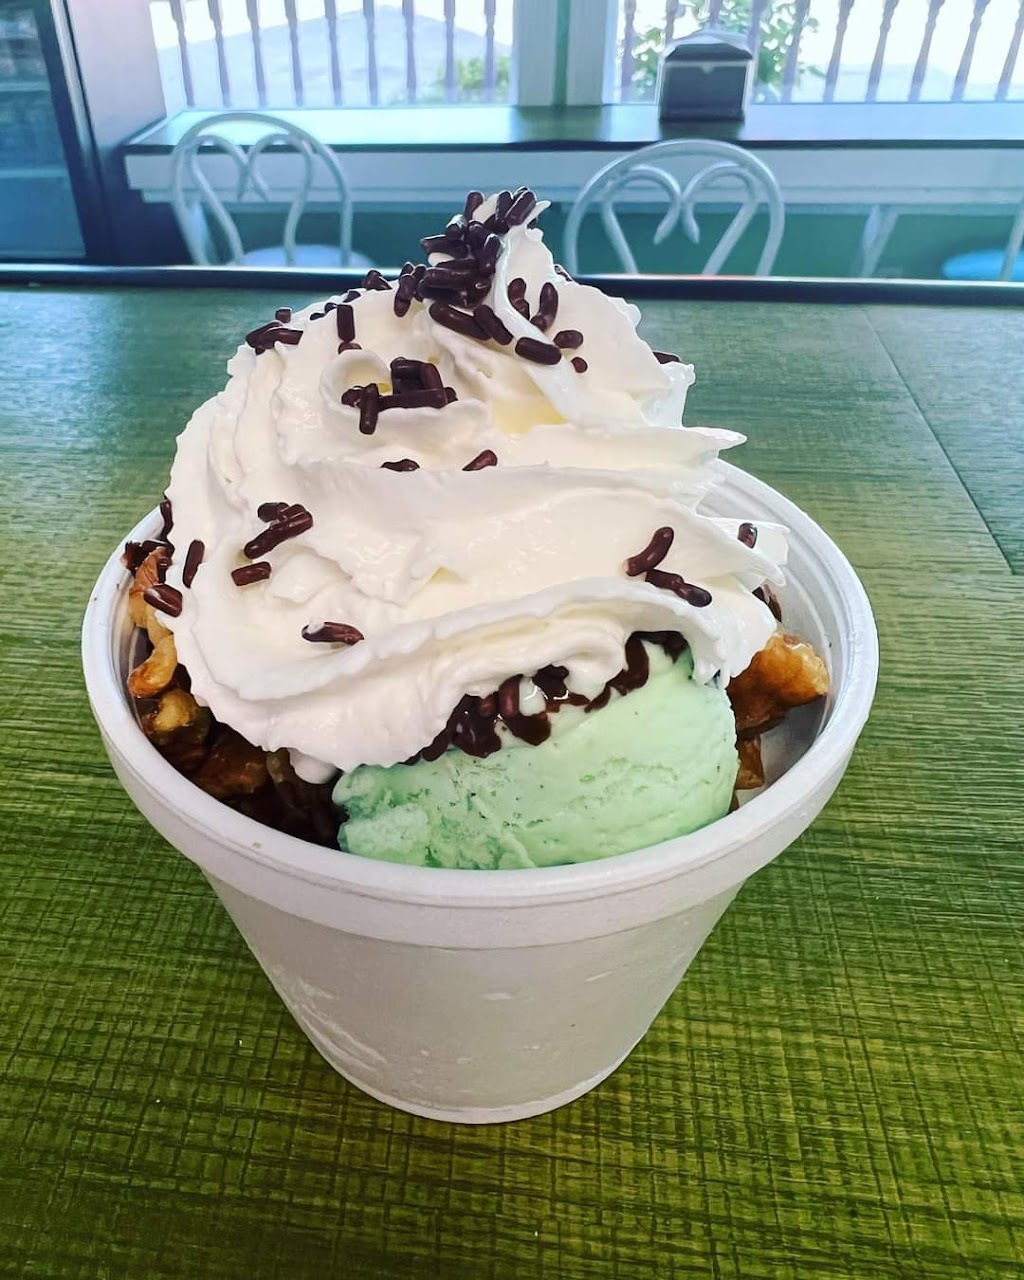 Allys Ice Cream & Grill Cafe | 141 Overlook Rd, Poughkeepsie, NY 12603 | Phone: (845) 204-6901